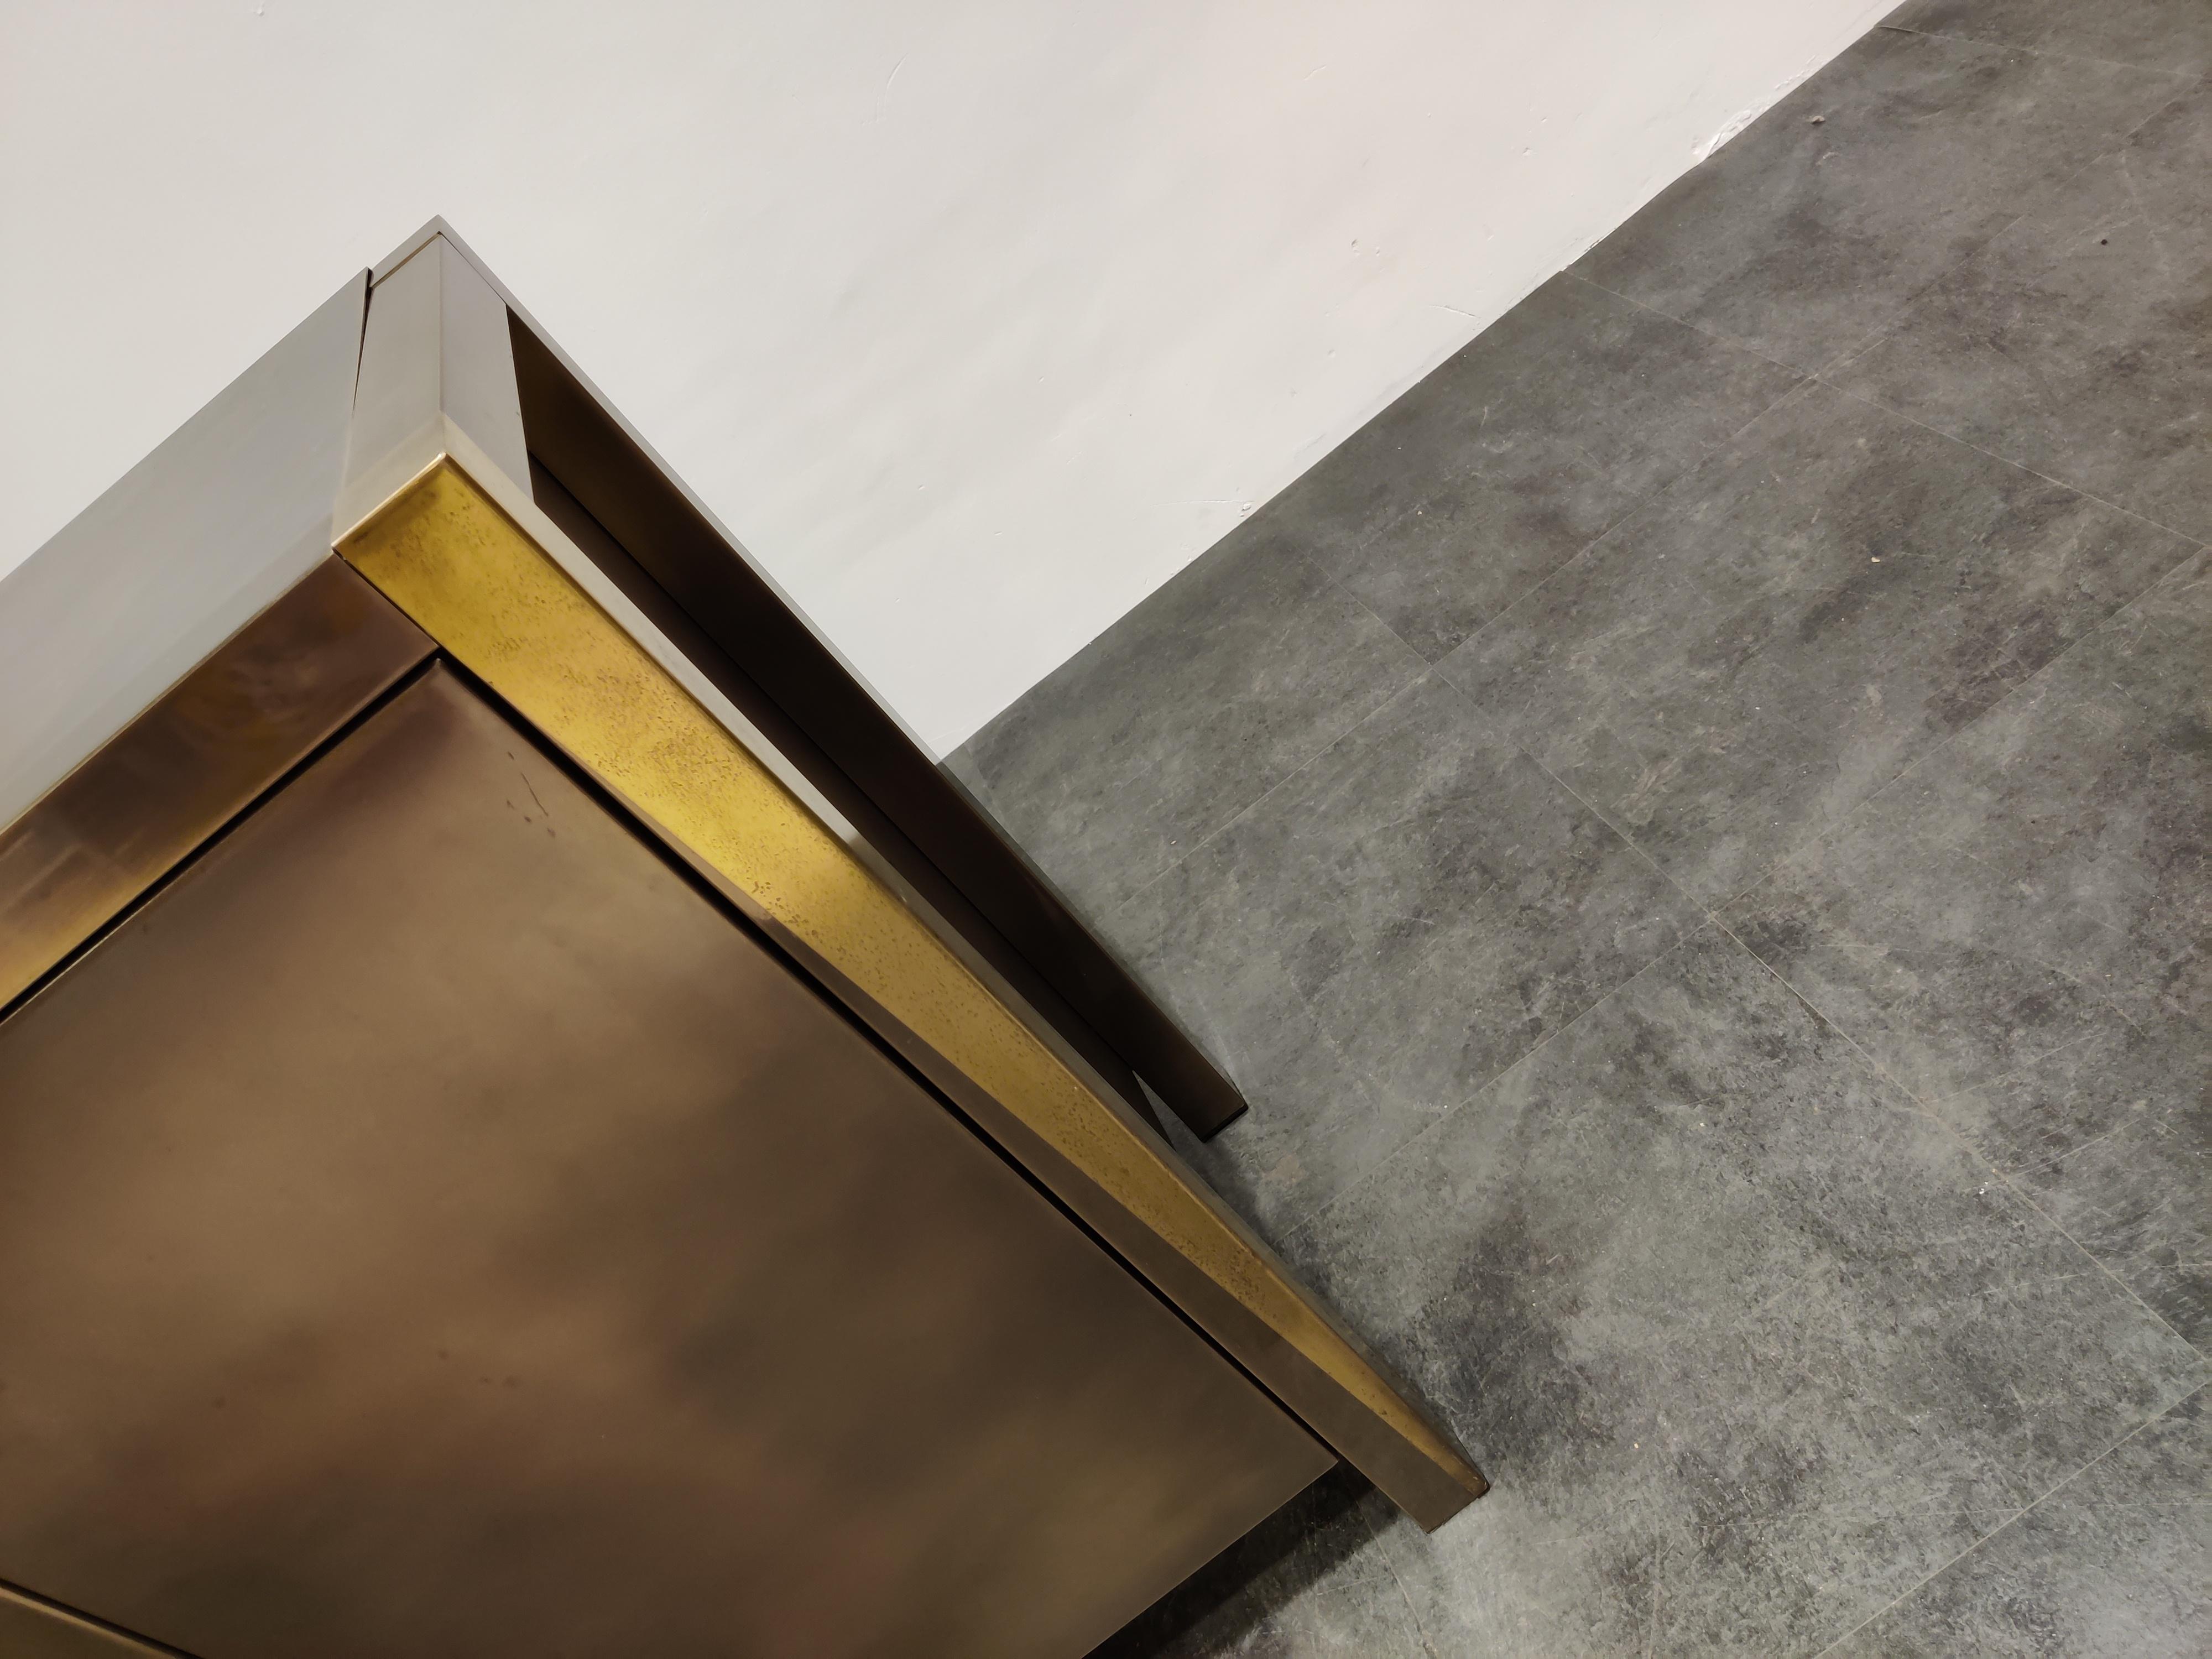 Luxurious heavy brass credenza with 5 doors

Belgochrom made quality furniture with fine materials. This shows in this credenza, with the heavy brass doors and good quality materials used both inside and outside.

The credenza provides a lot of